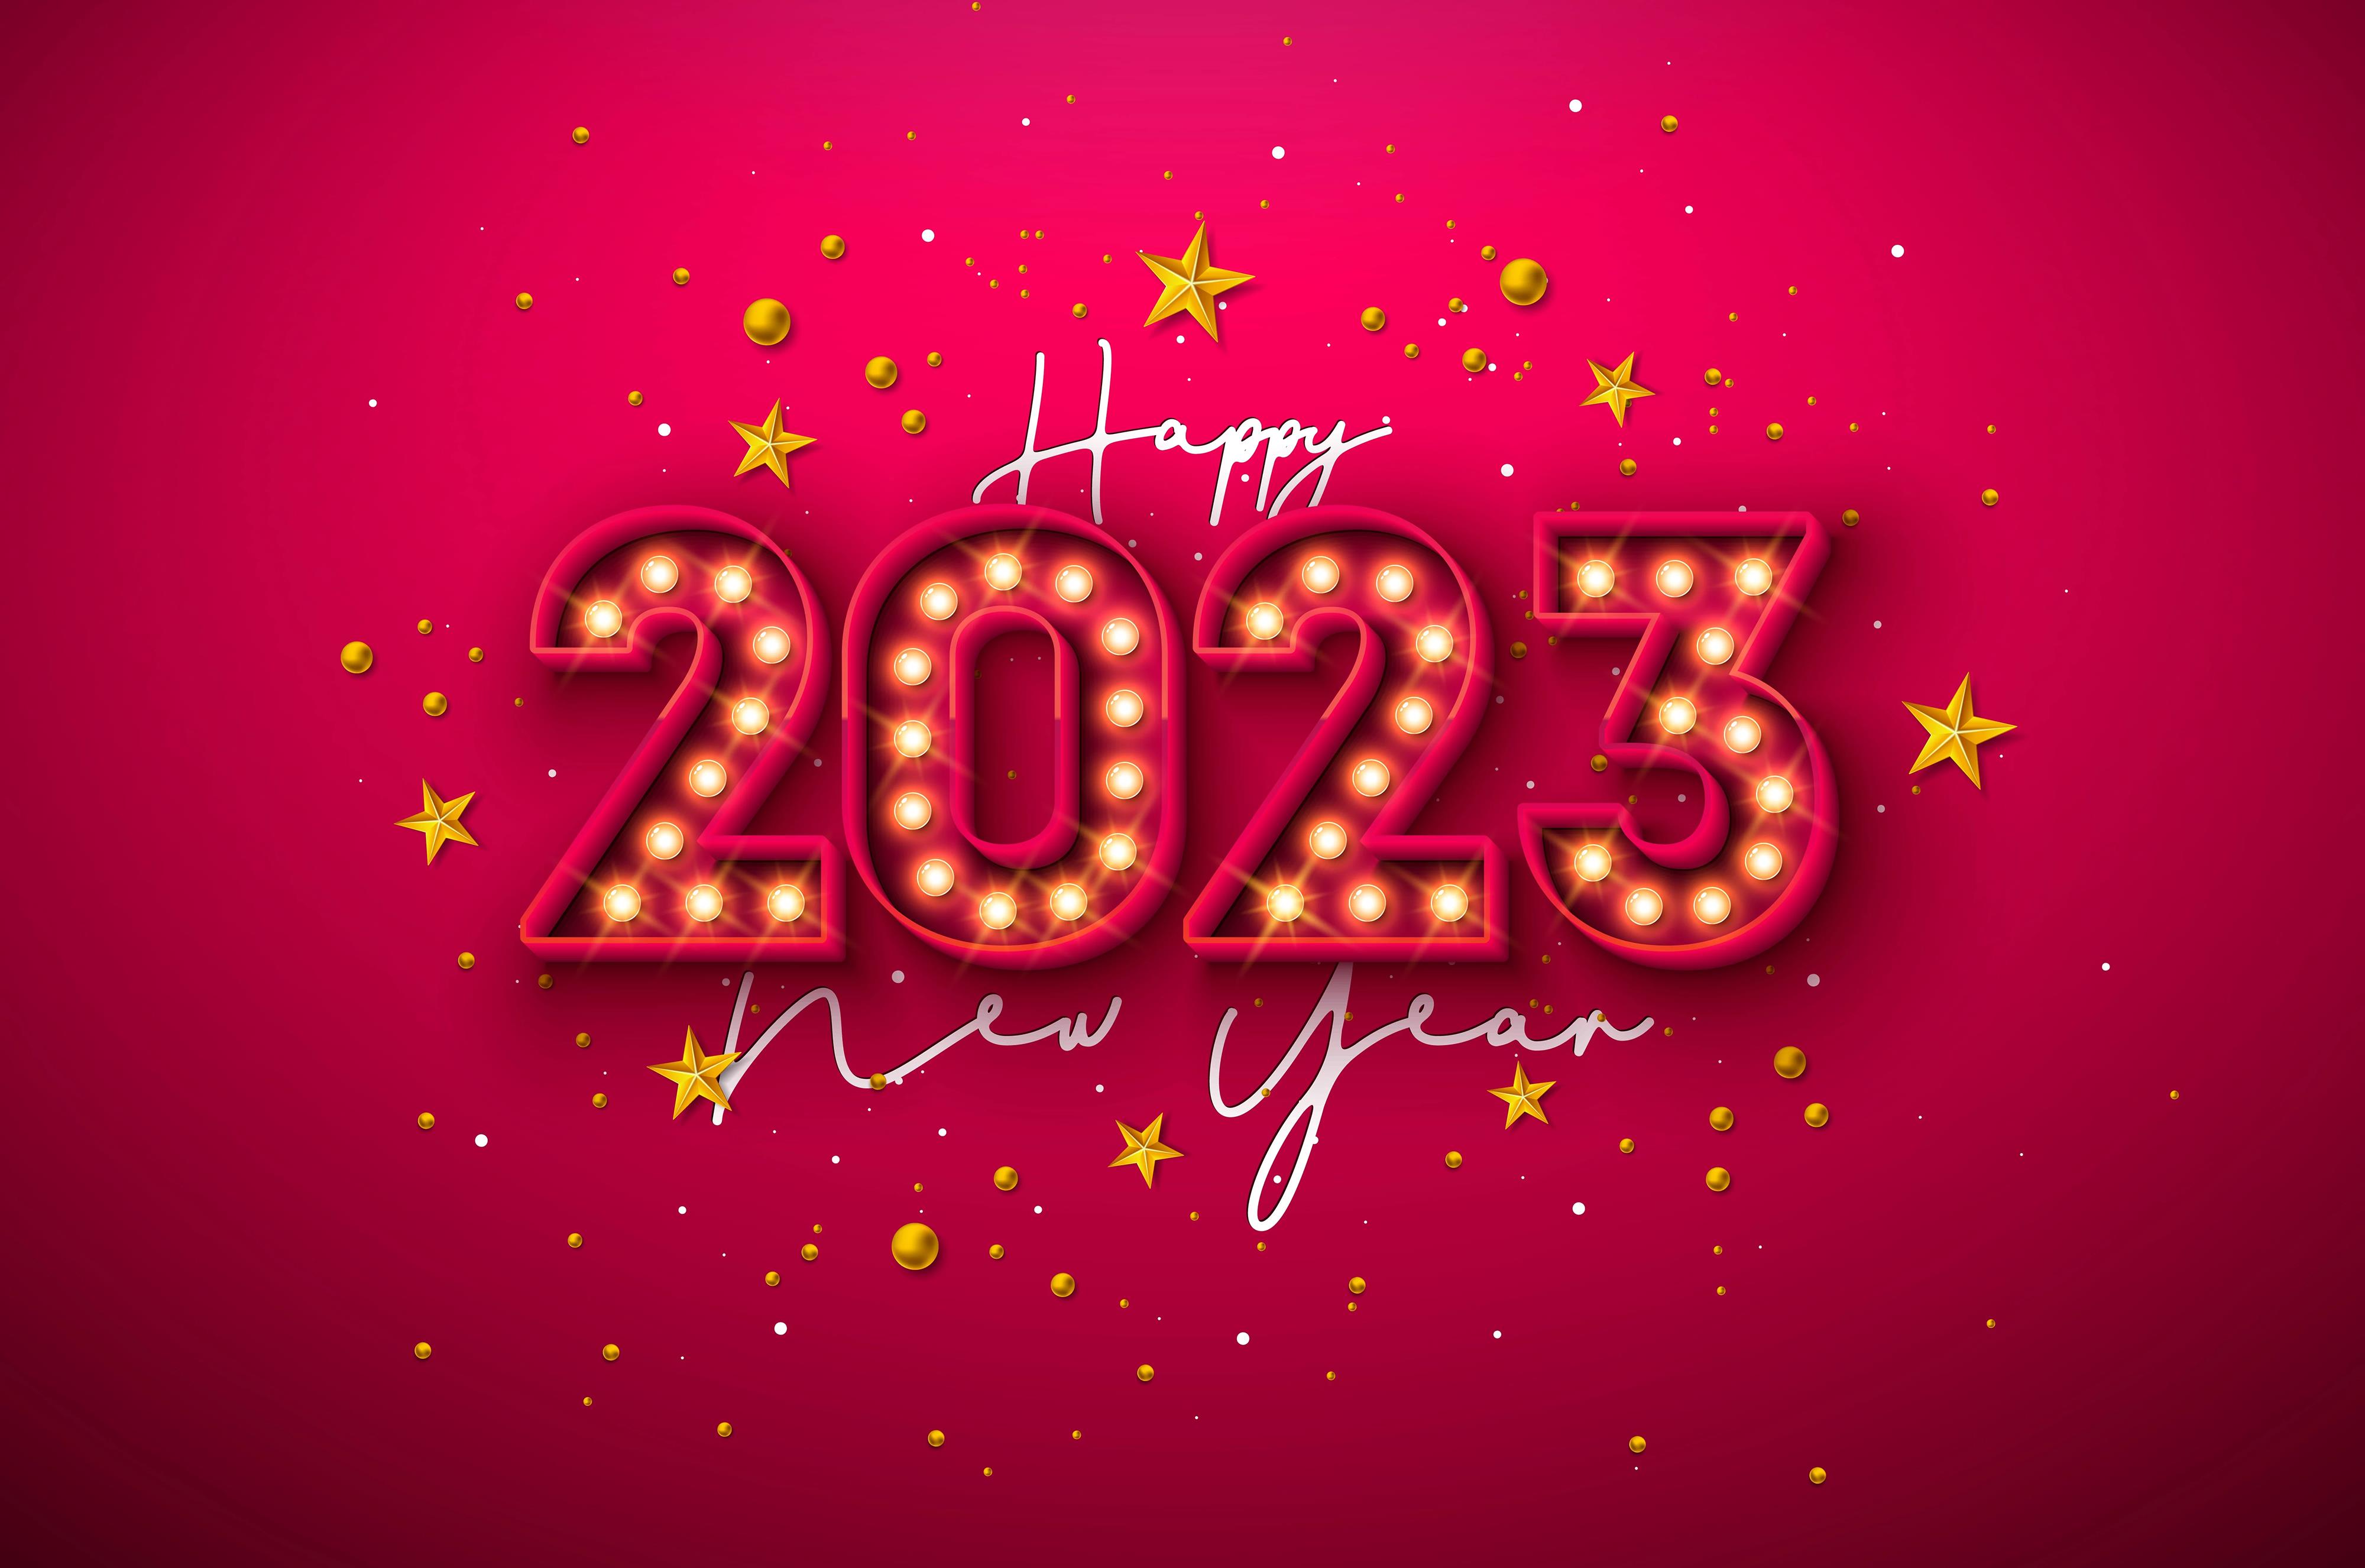 New Year 2023 4k Ultra HD Wallpaper Beautiful 2023 Happy New Year Red Background Image